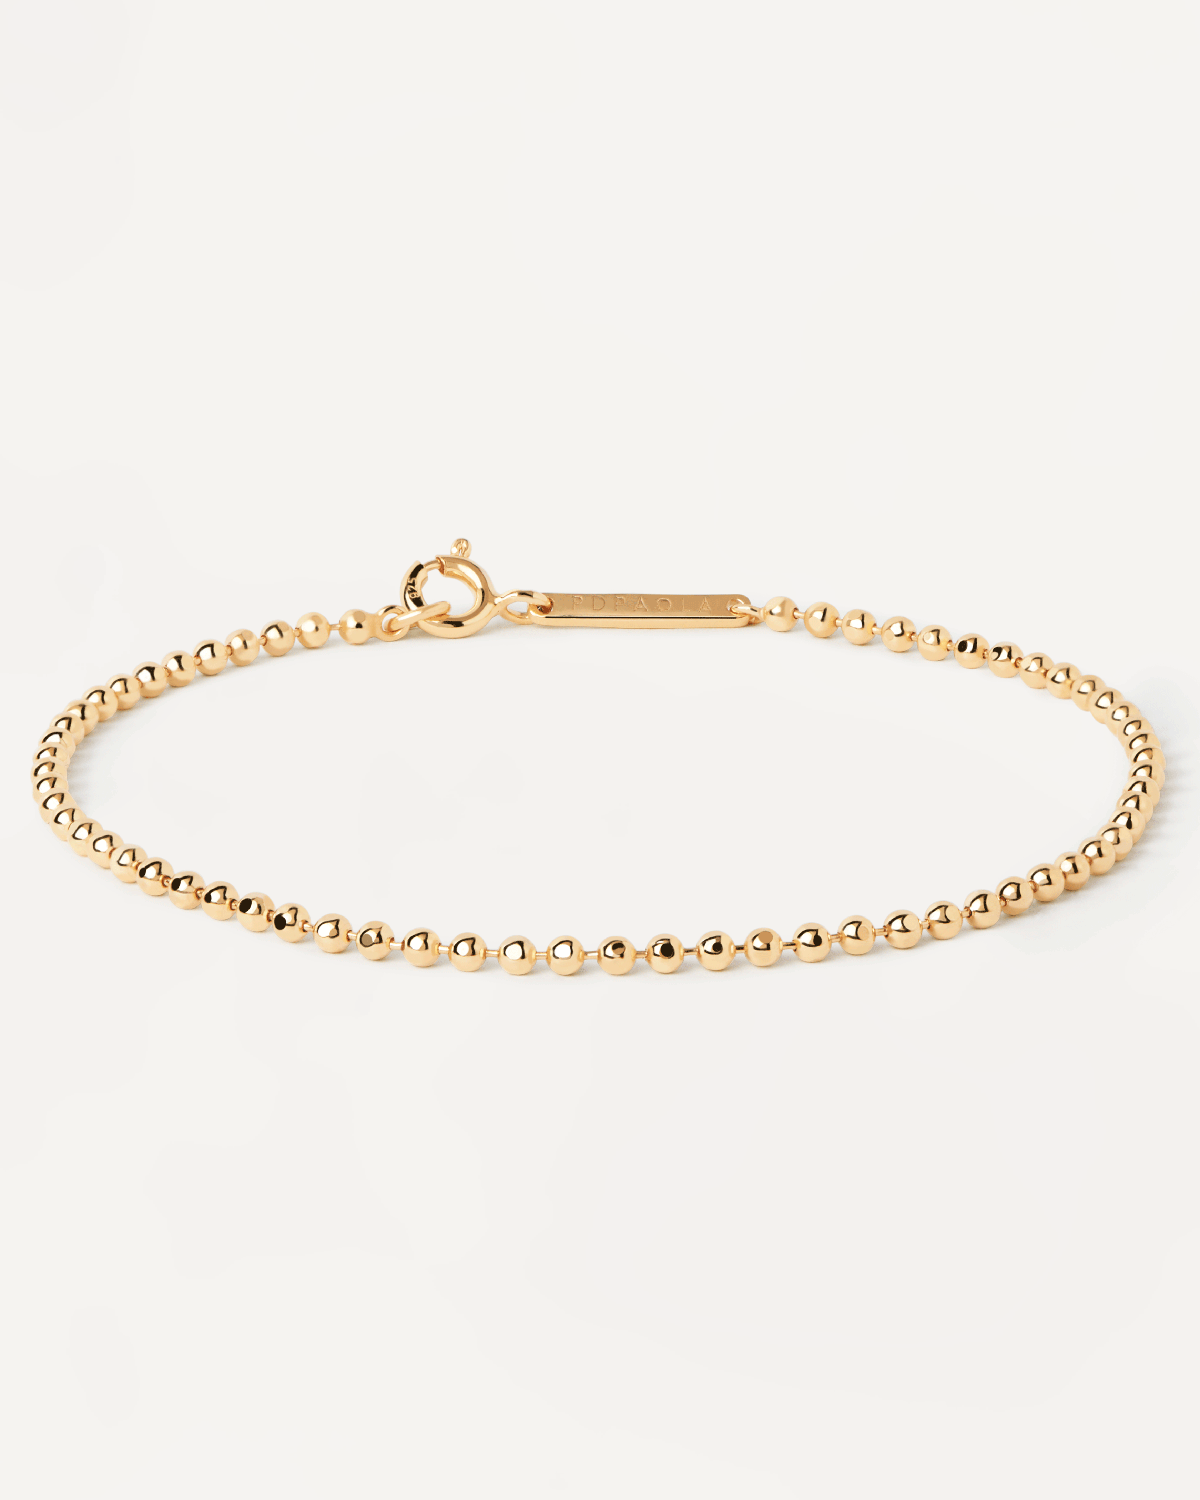 2024 Selection | Ball Chain Bracelet. Ball-textured chain bracelet in plain gold-plated silver. Get the latest arrival from PDPAOLA. Place your order safely and get this Best Seller. Free Shipping.